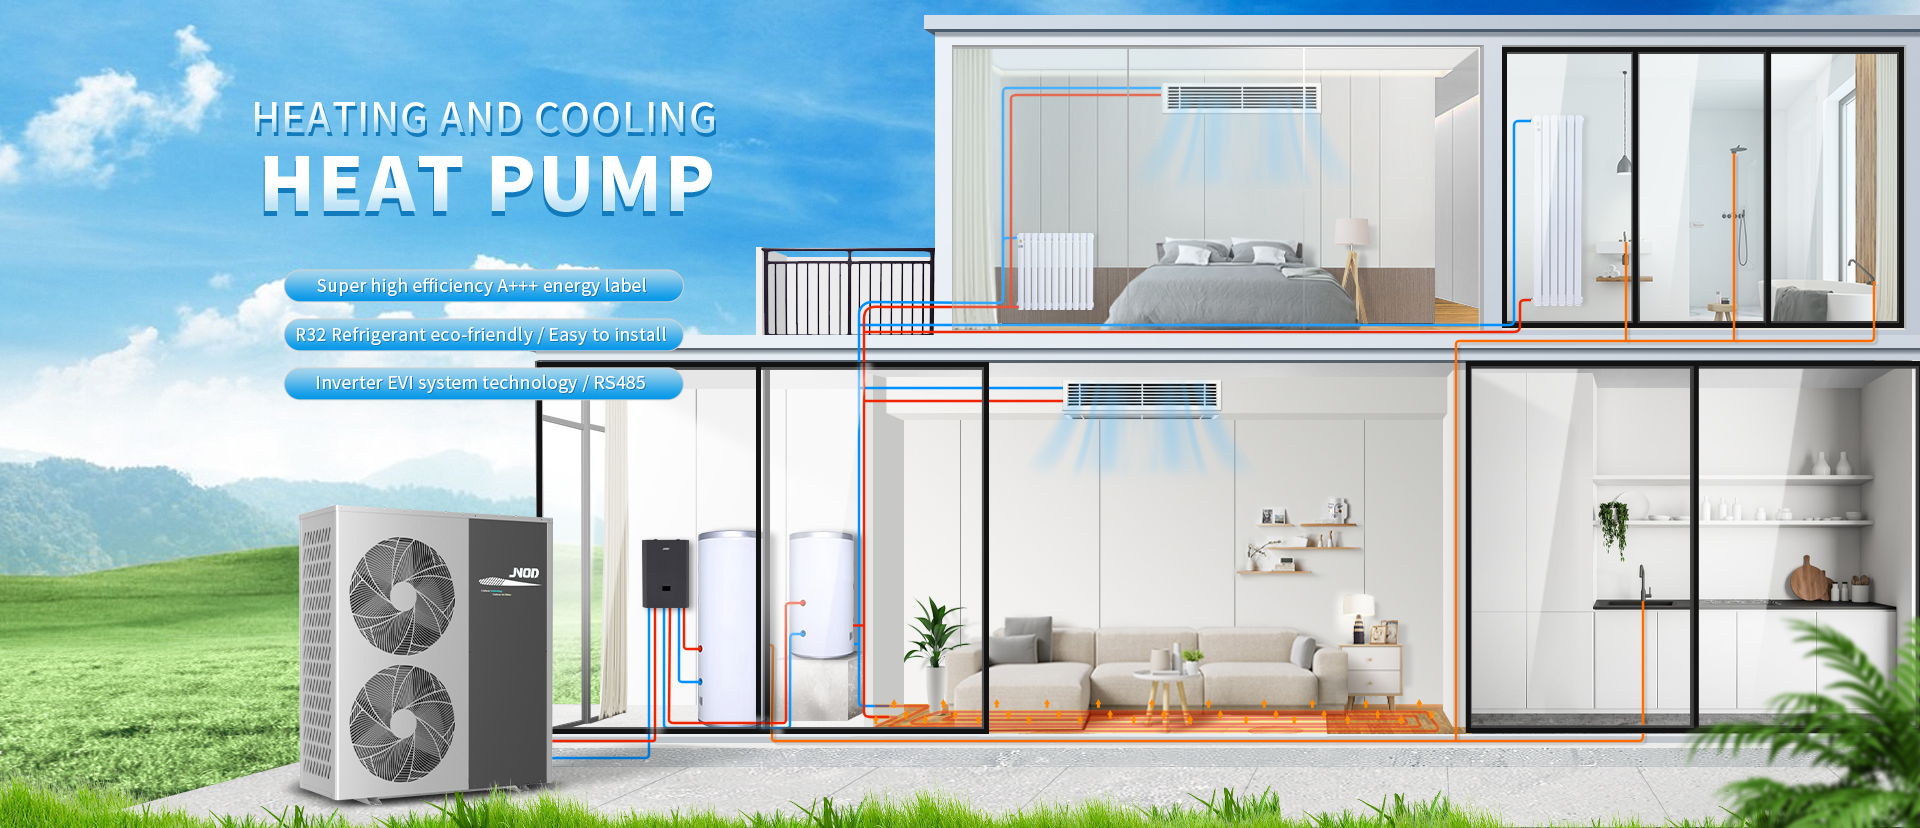 Heating And Cooling Heat Pump dealer